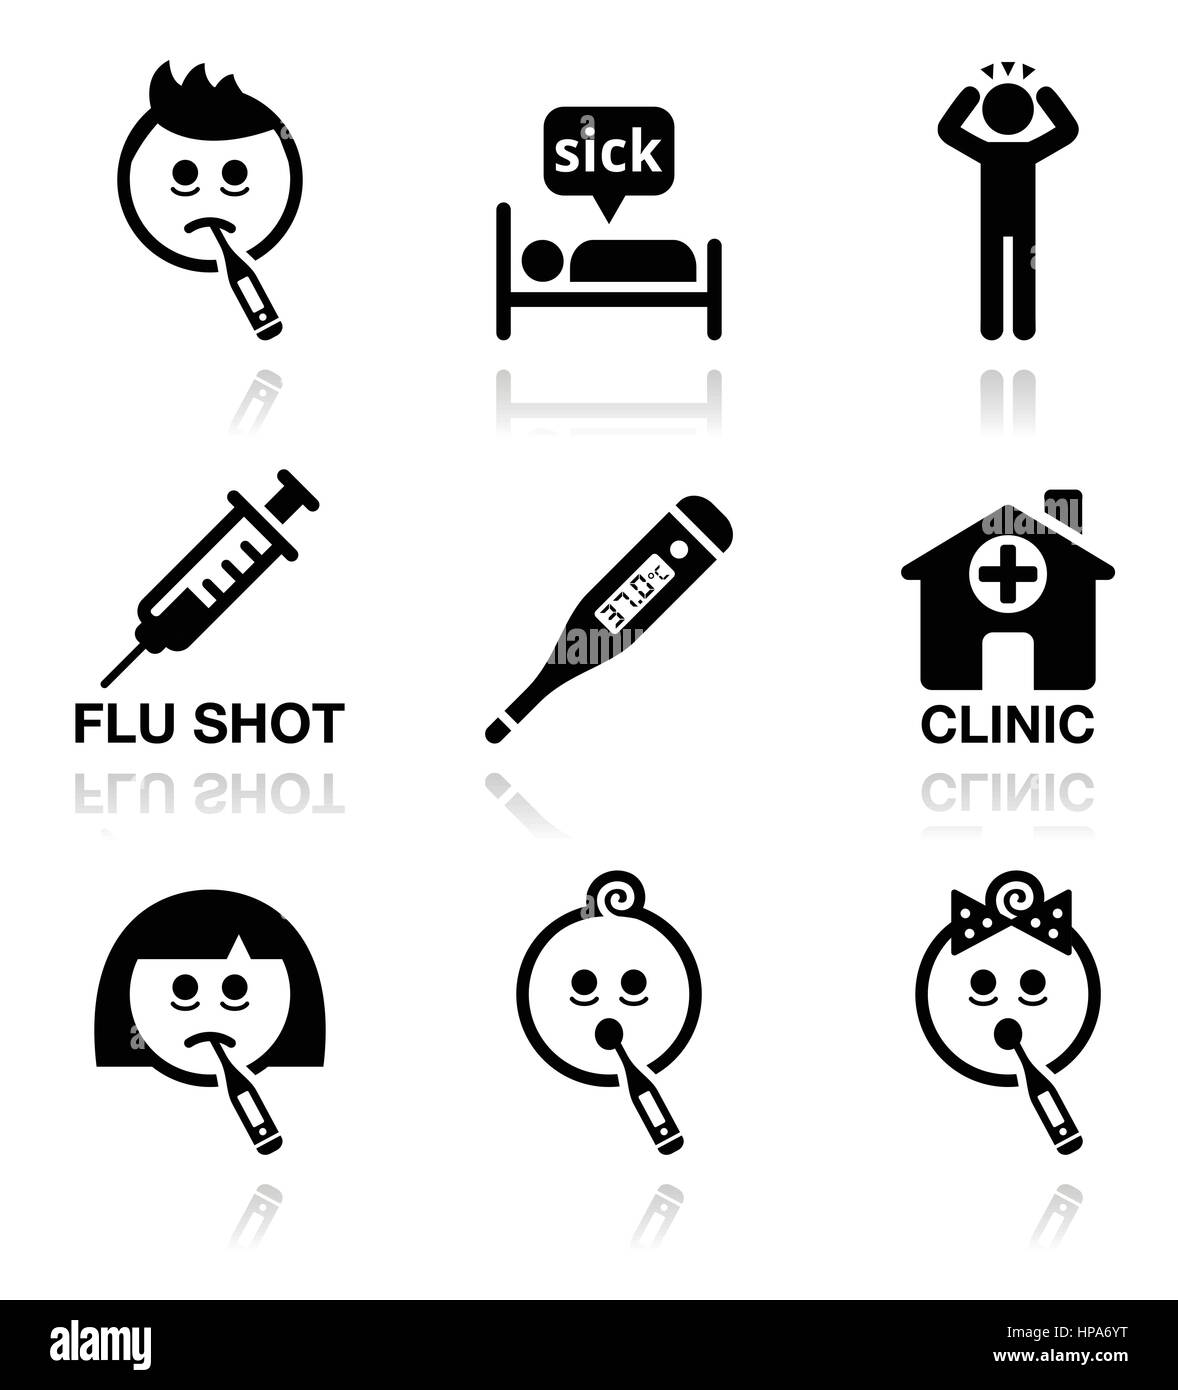 Cold, flu, sick people vector icons set Stock Vector